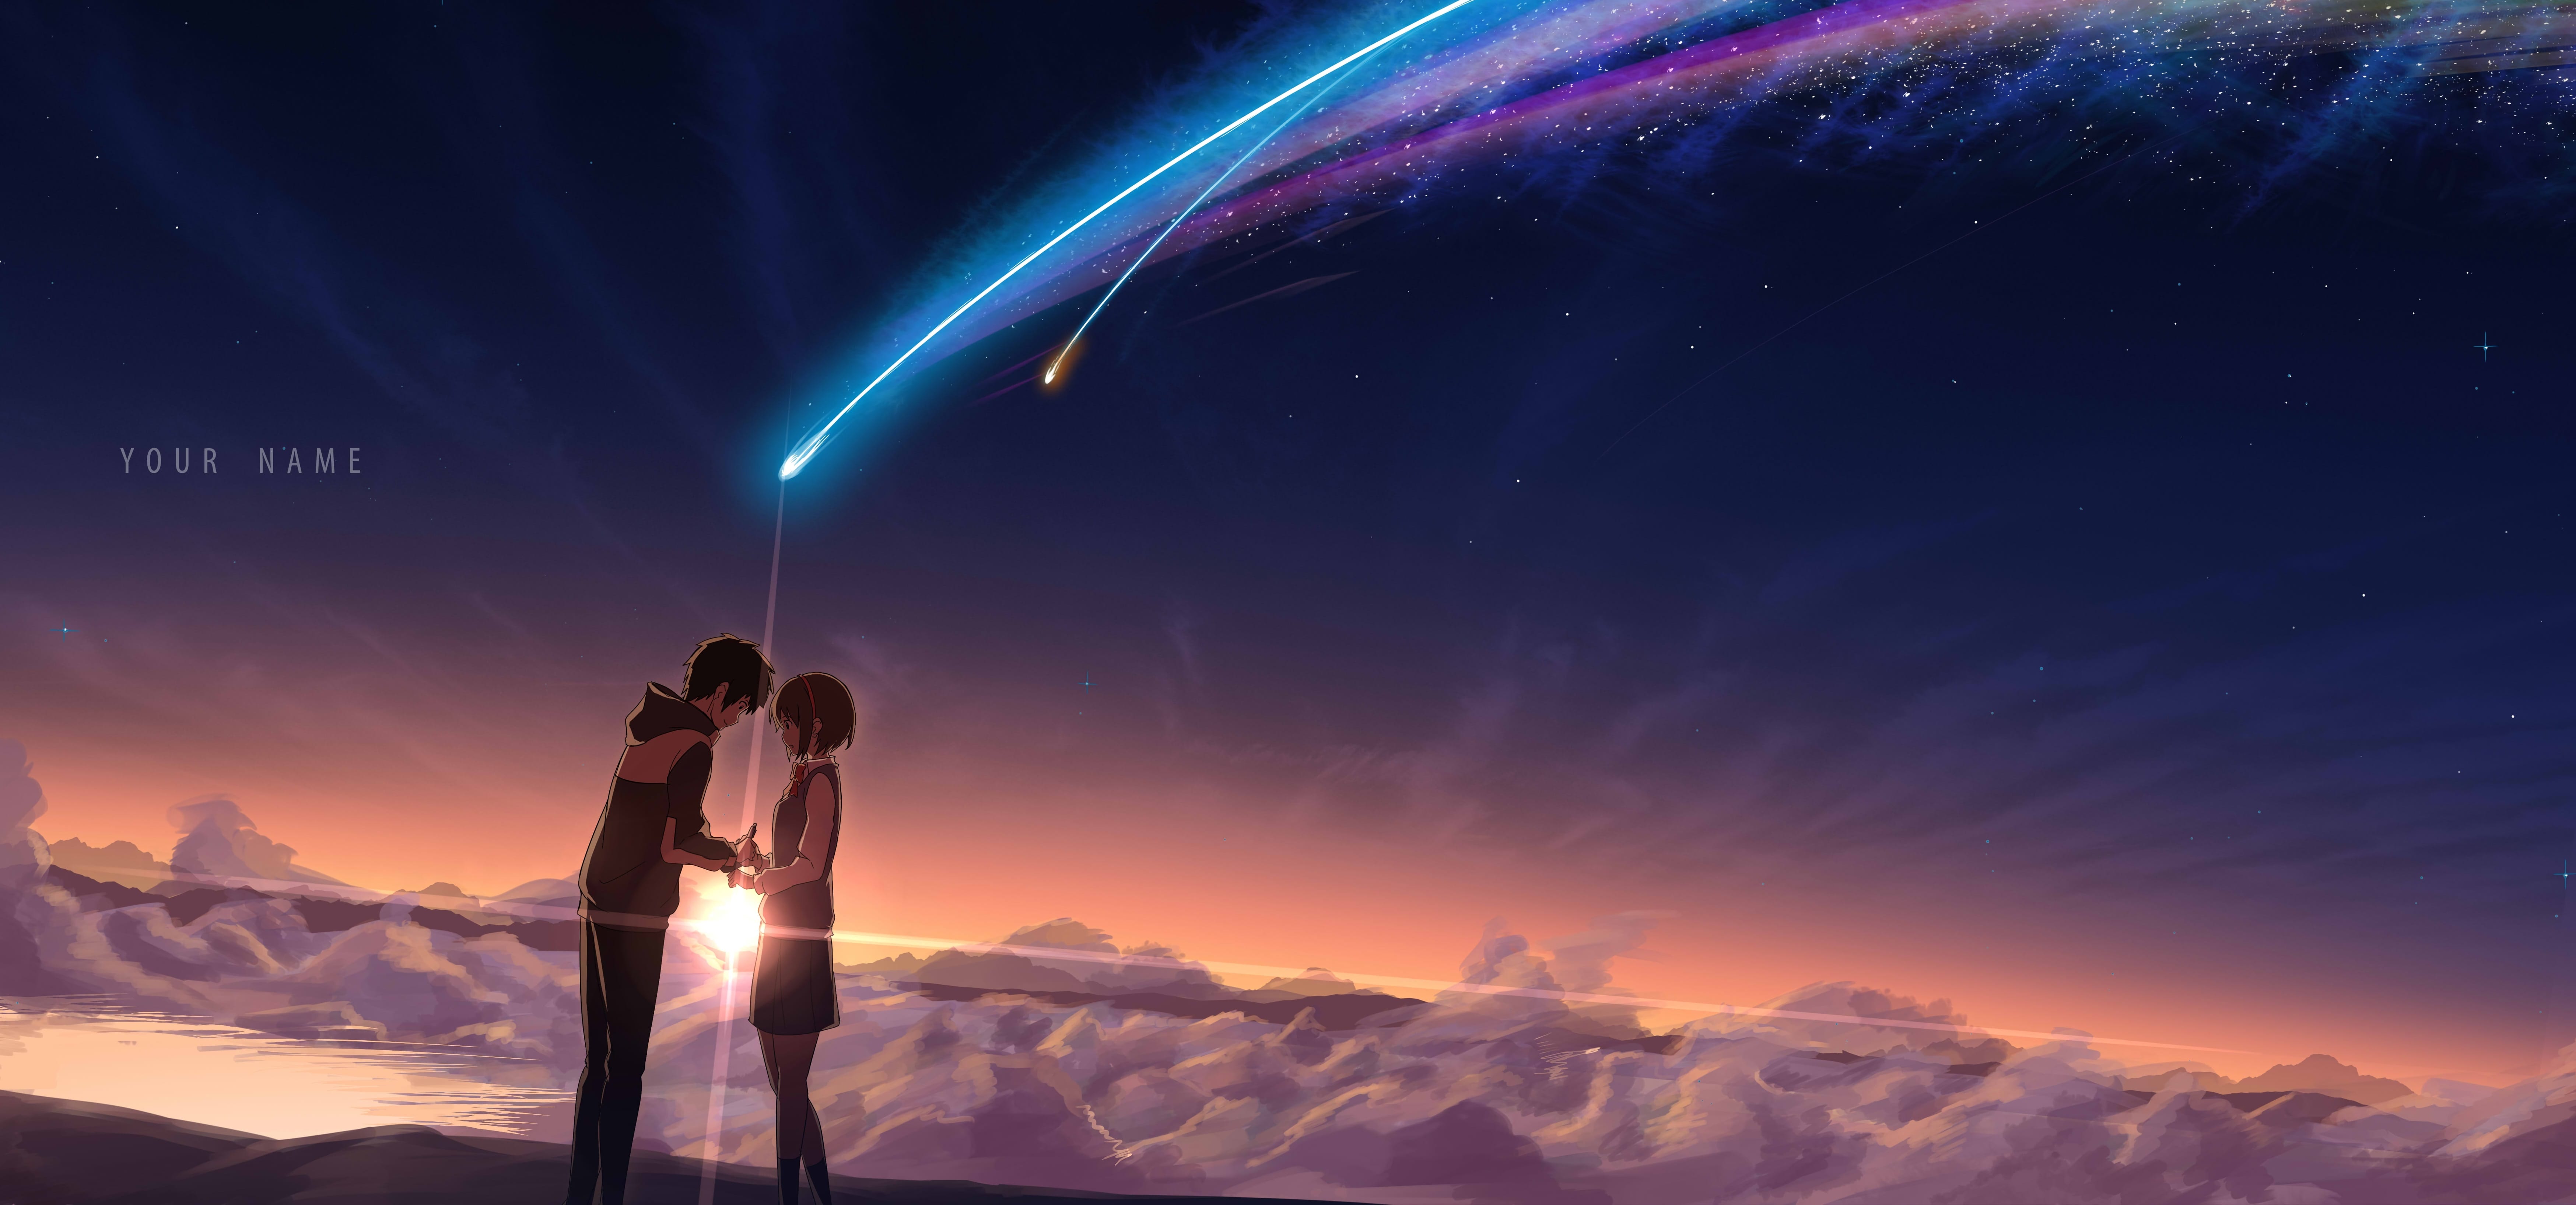 Wallpaper of Movie Your Name